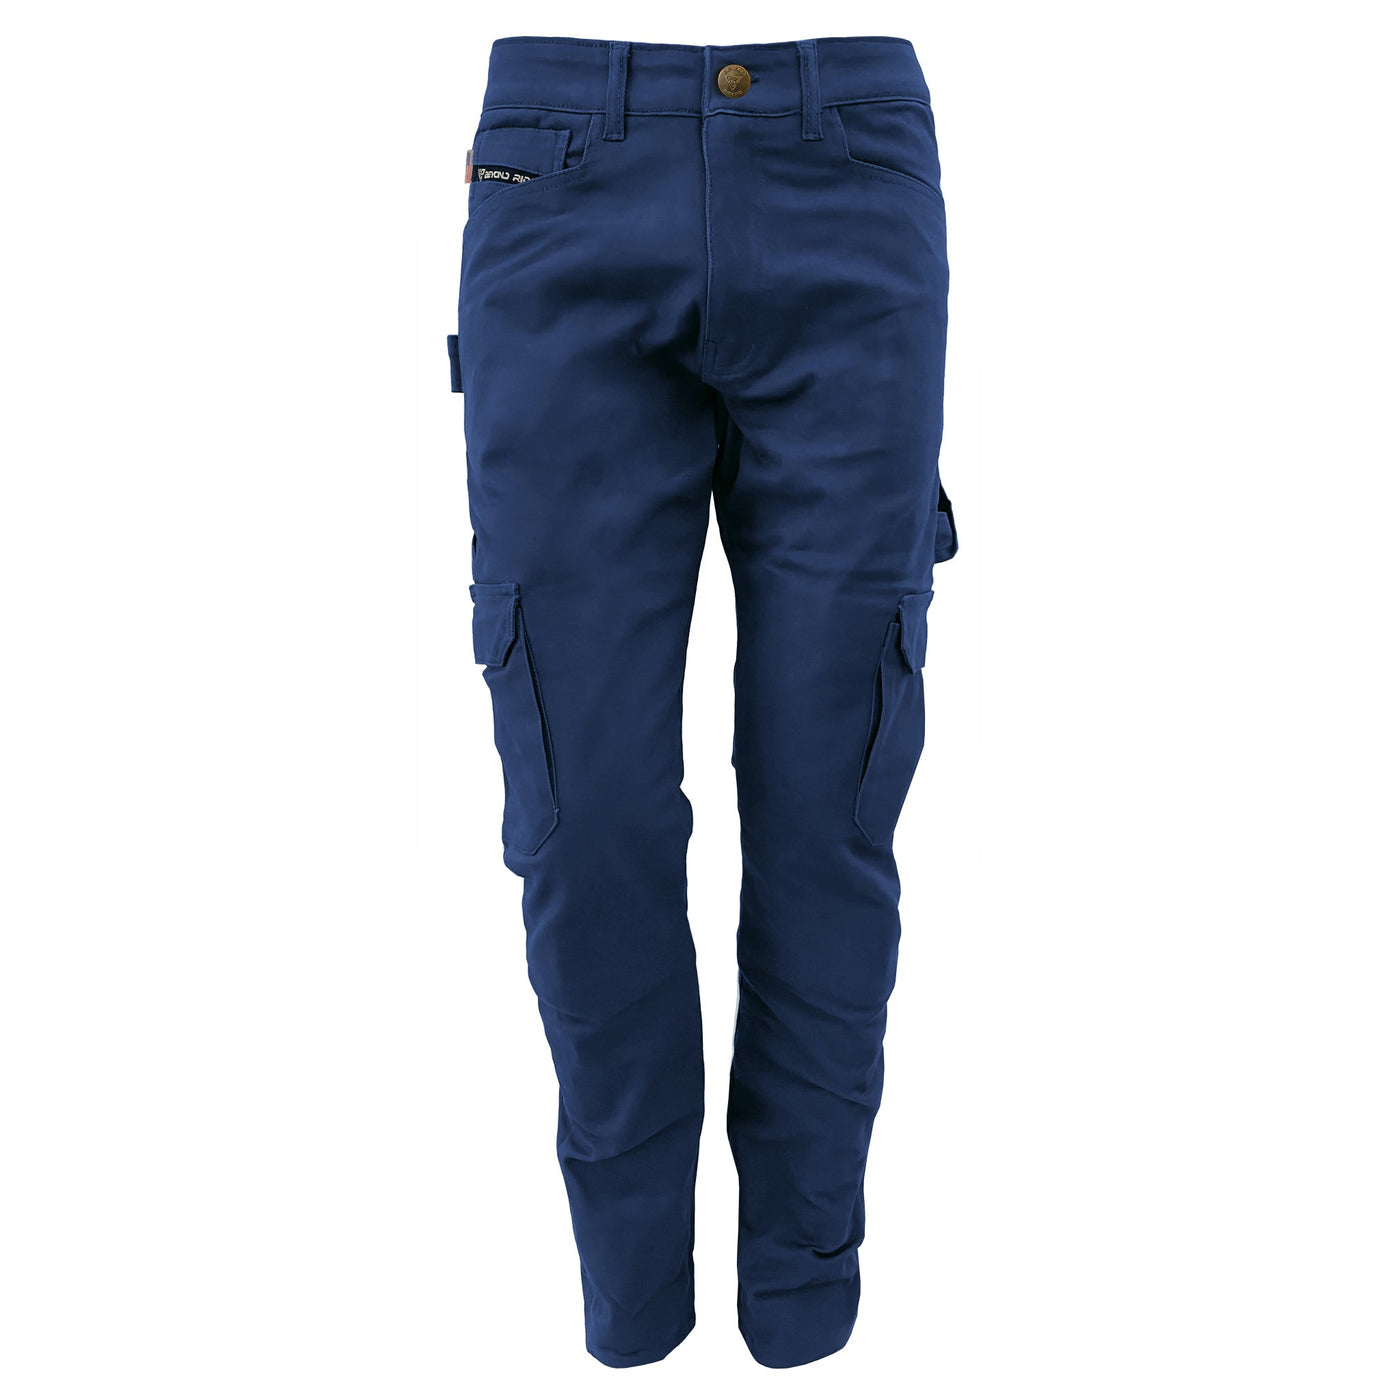 Straight Leg Cargo Pants with Pads - Navy Blue